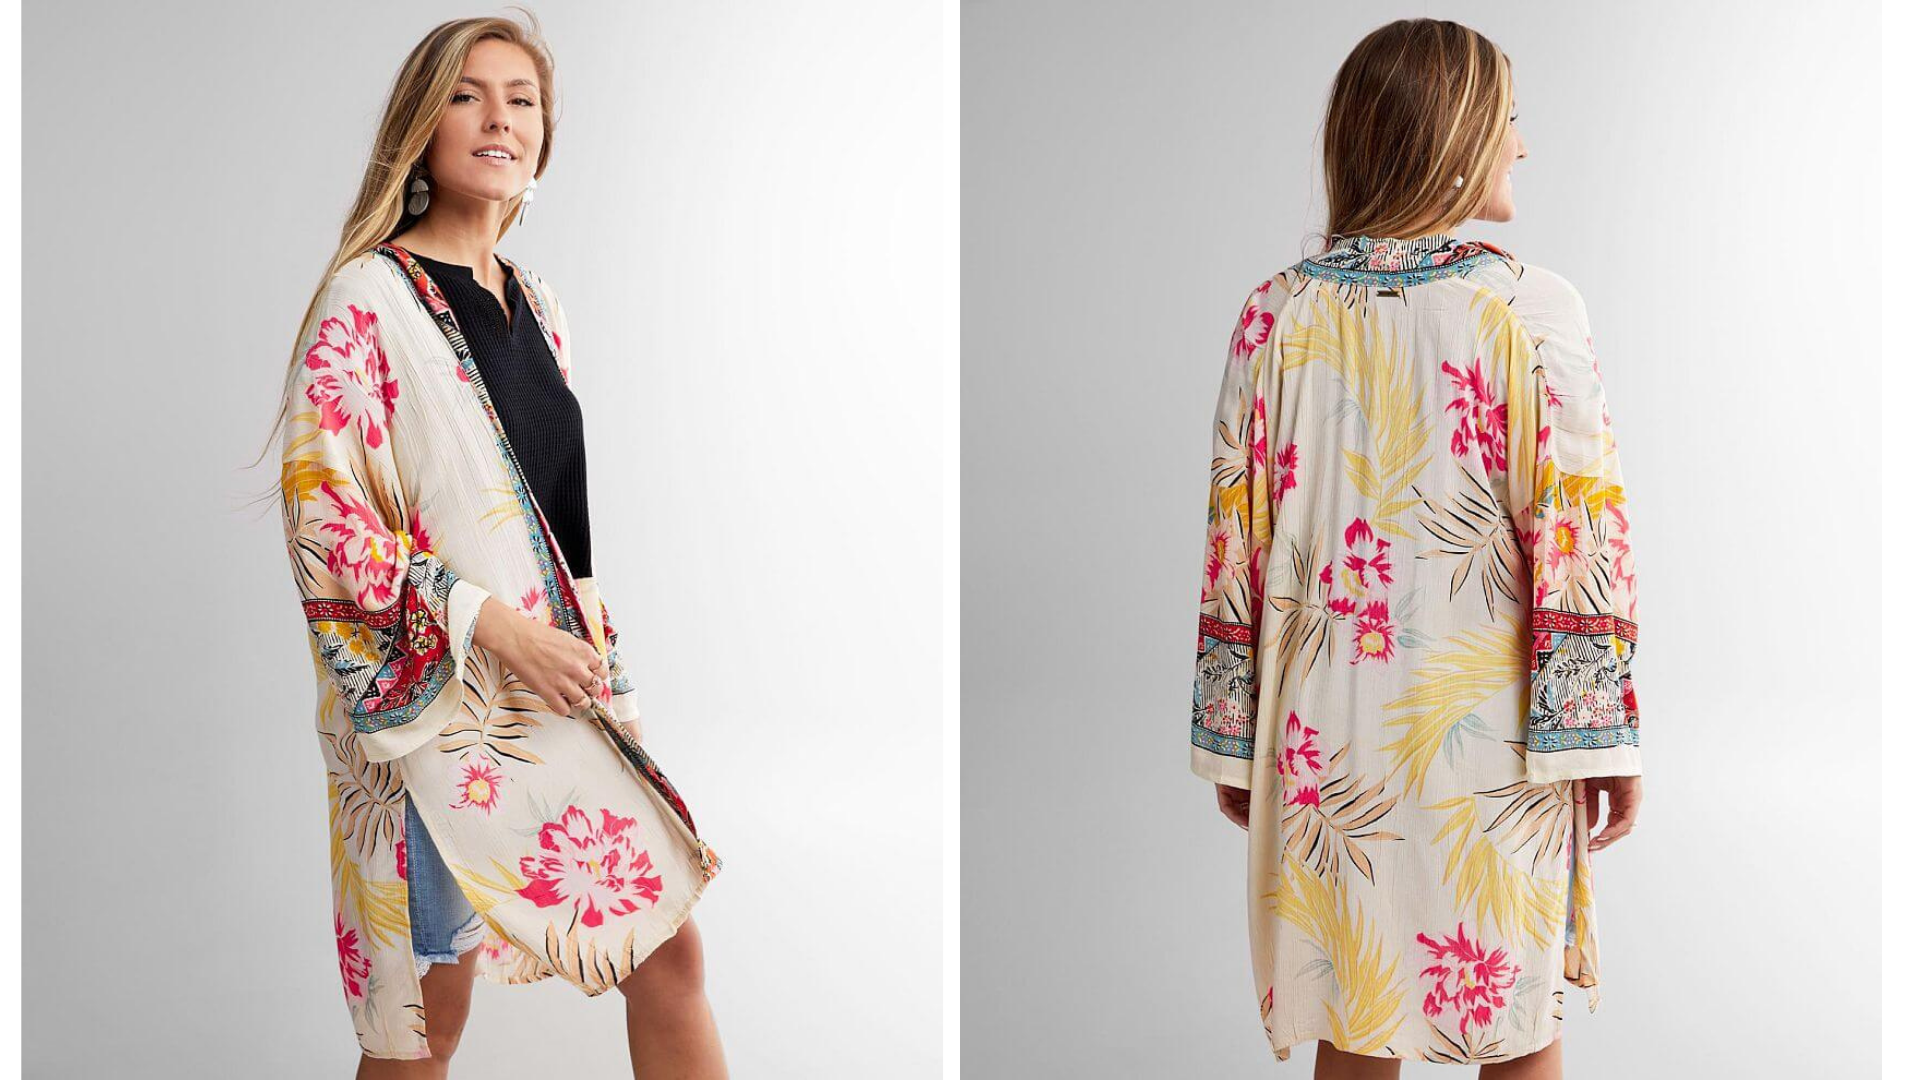 13 Best Beach Cover Ups That Are as Practical as They Are Stylish